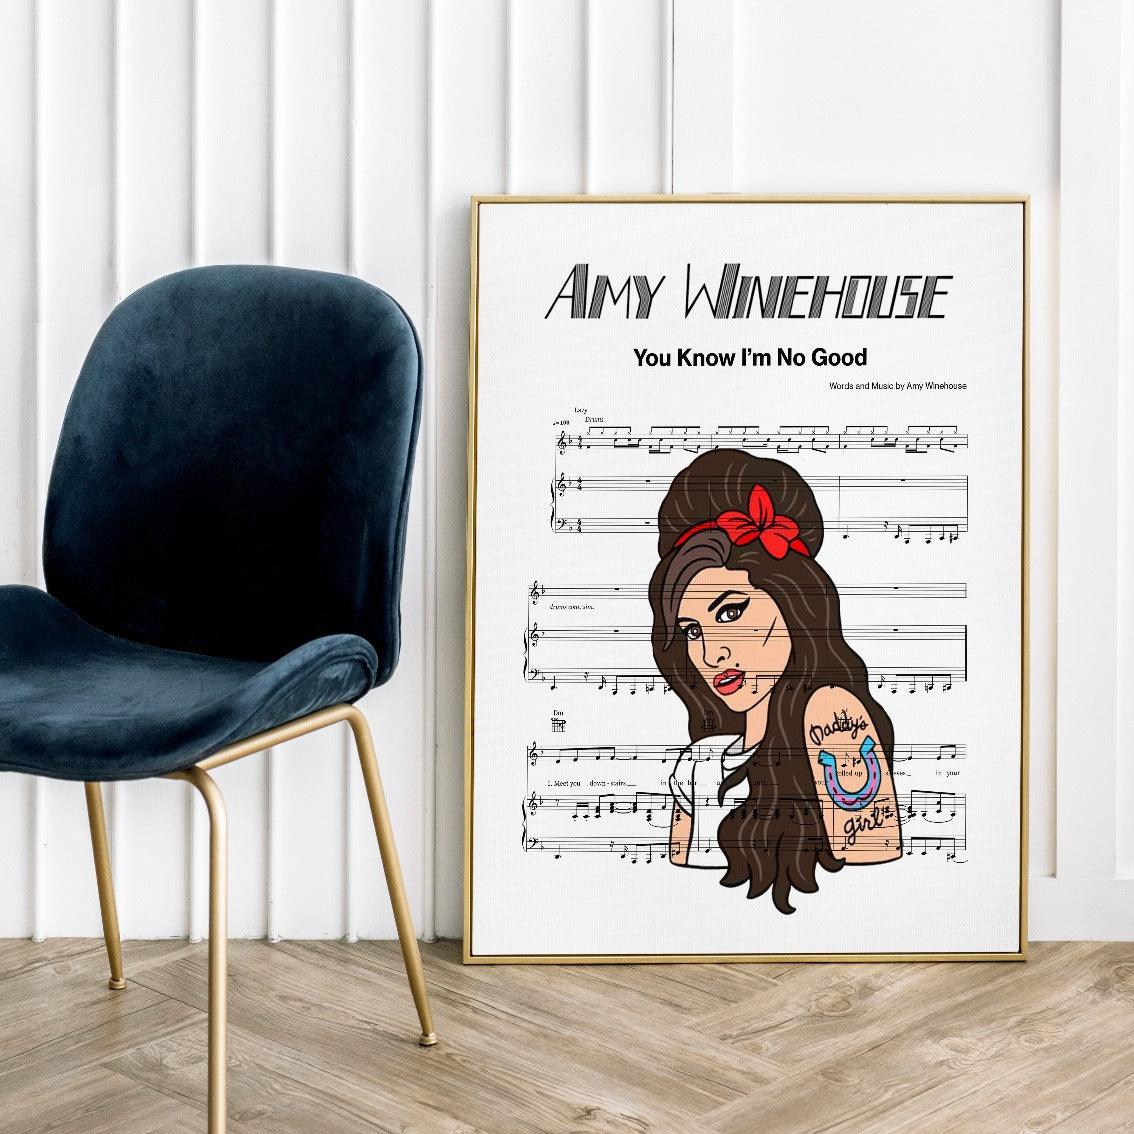 Print lyrical with these unusual and Natural High quality black and white musical scores with brightly coloured illustrations and quirky art print by artist Amy Winehouse - You Know I'm No Good to put on the wall of the room at home. A4 Posters uk By 98types art online.